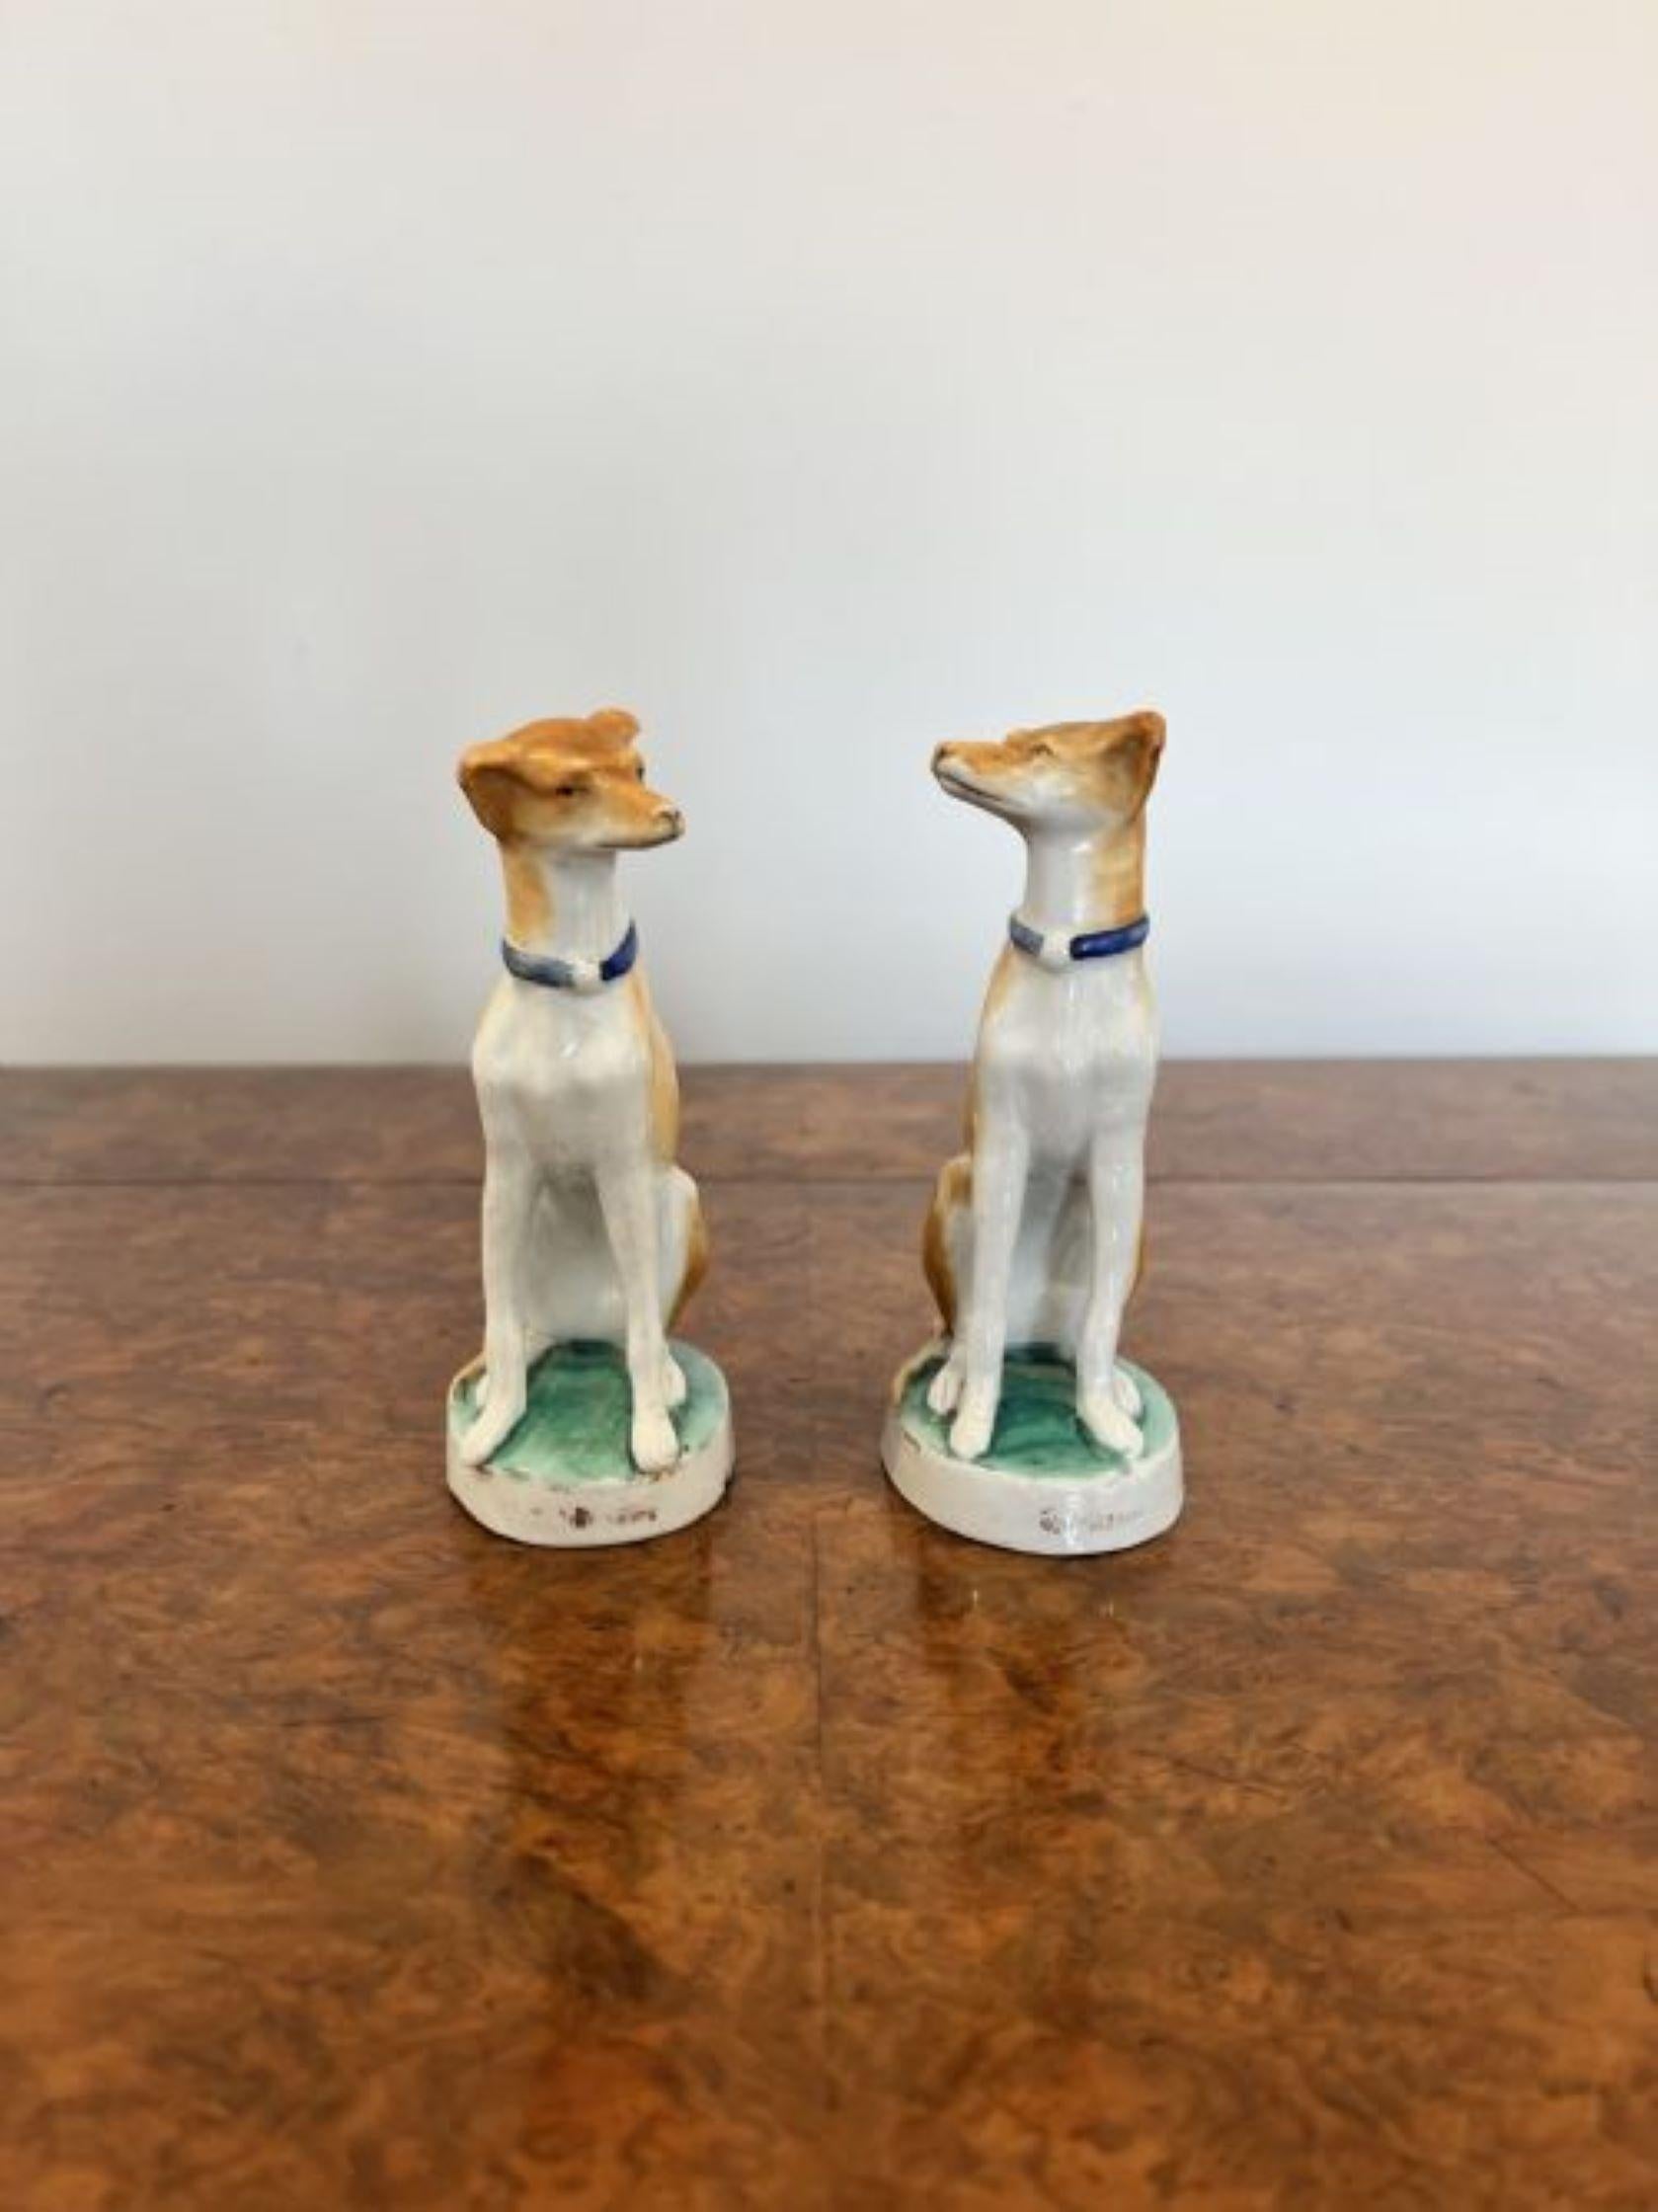 Pair of antique Victorian quality porcelain dogs having a quality pair of antique Victorian dogs sitting on an oval base wearing matching blue collars in white and light brown colours. 